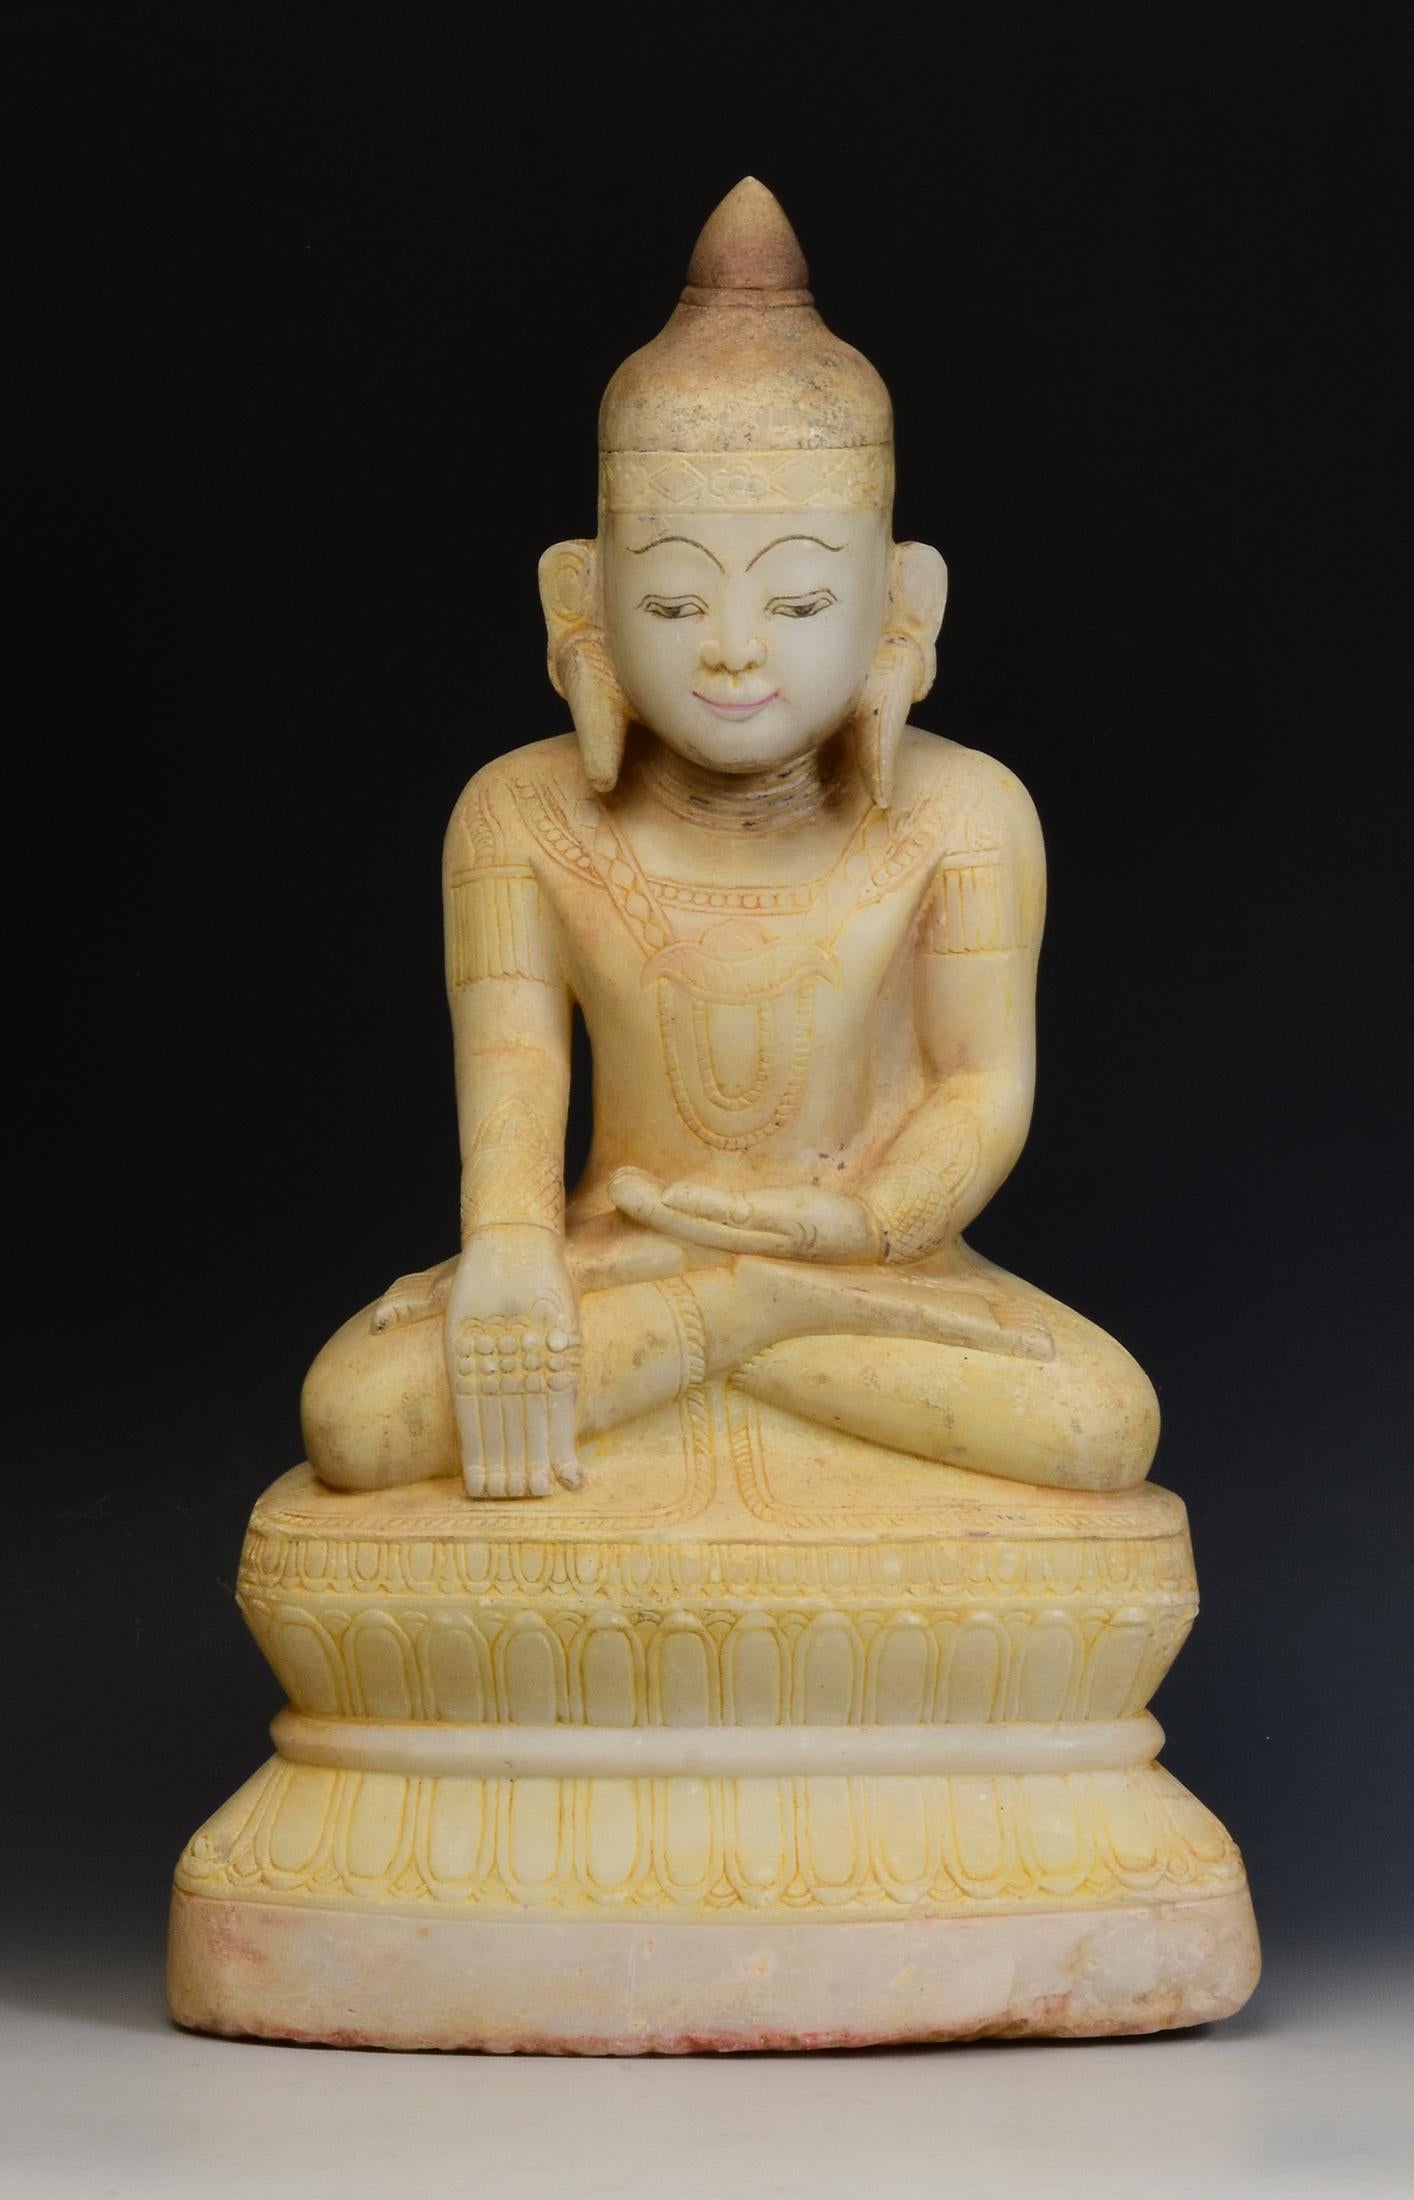 Antique Burmese alabaster seated crowned Buddha, or also known as 'King Buddha', wearing diadem-crowns and ornaments of kings instead of ordinary monk's robes.

Age: Burma, Ava Period, 15th Century
Size: Height 51.5 C.M. / Width 30.5 C.M. / Depth